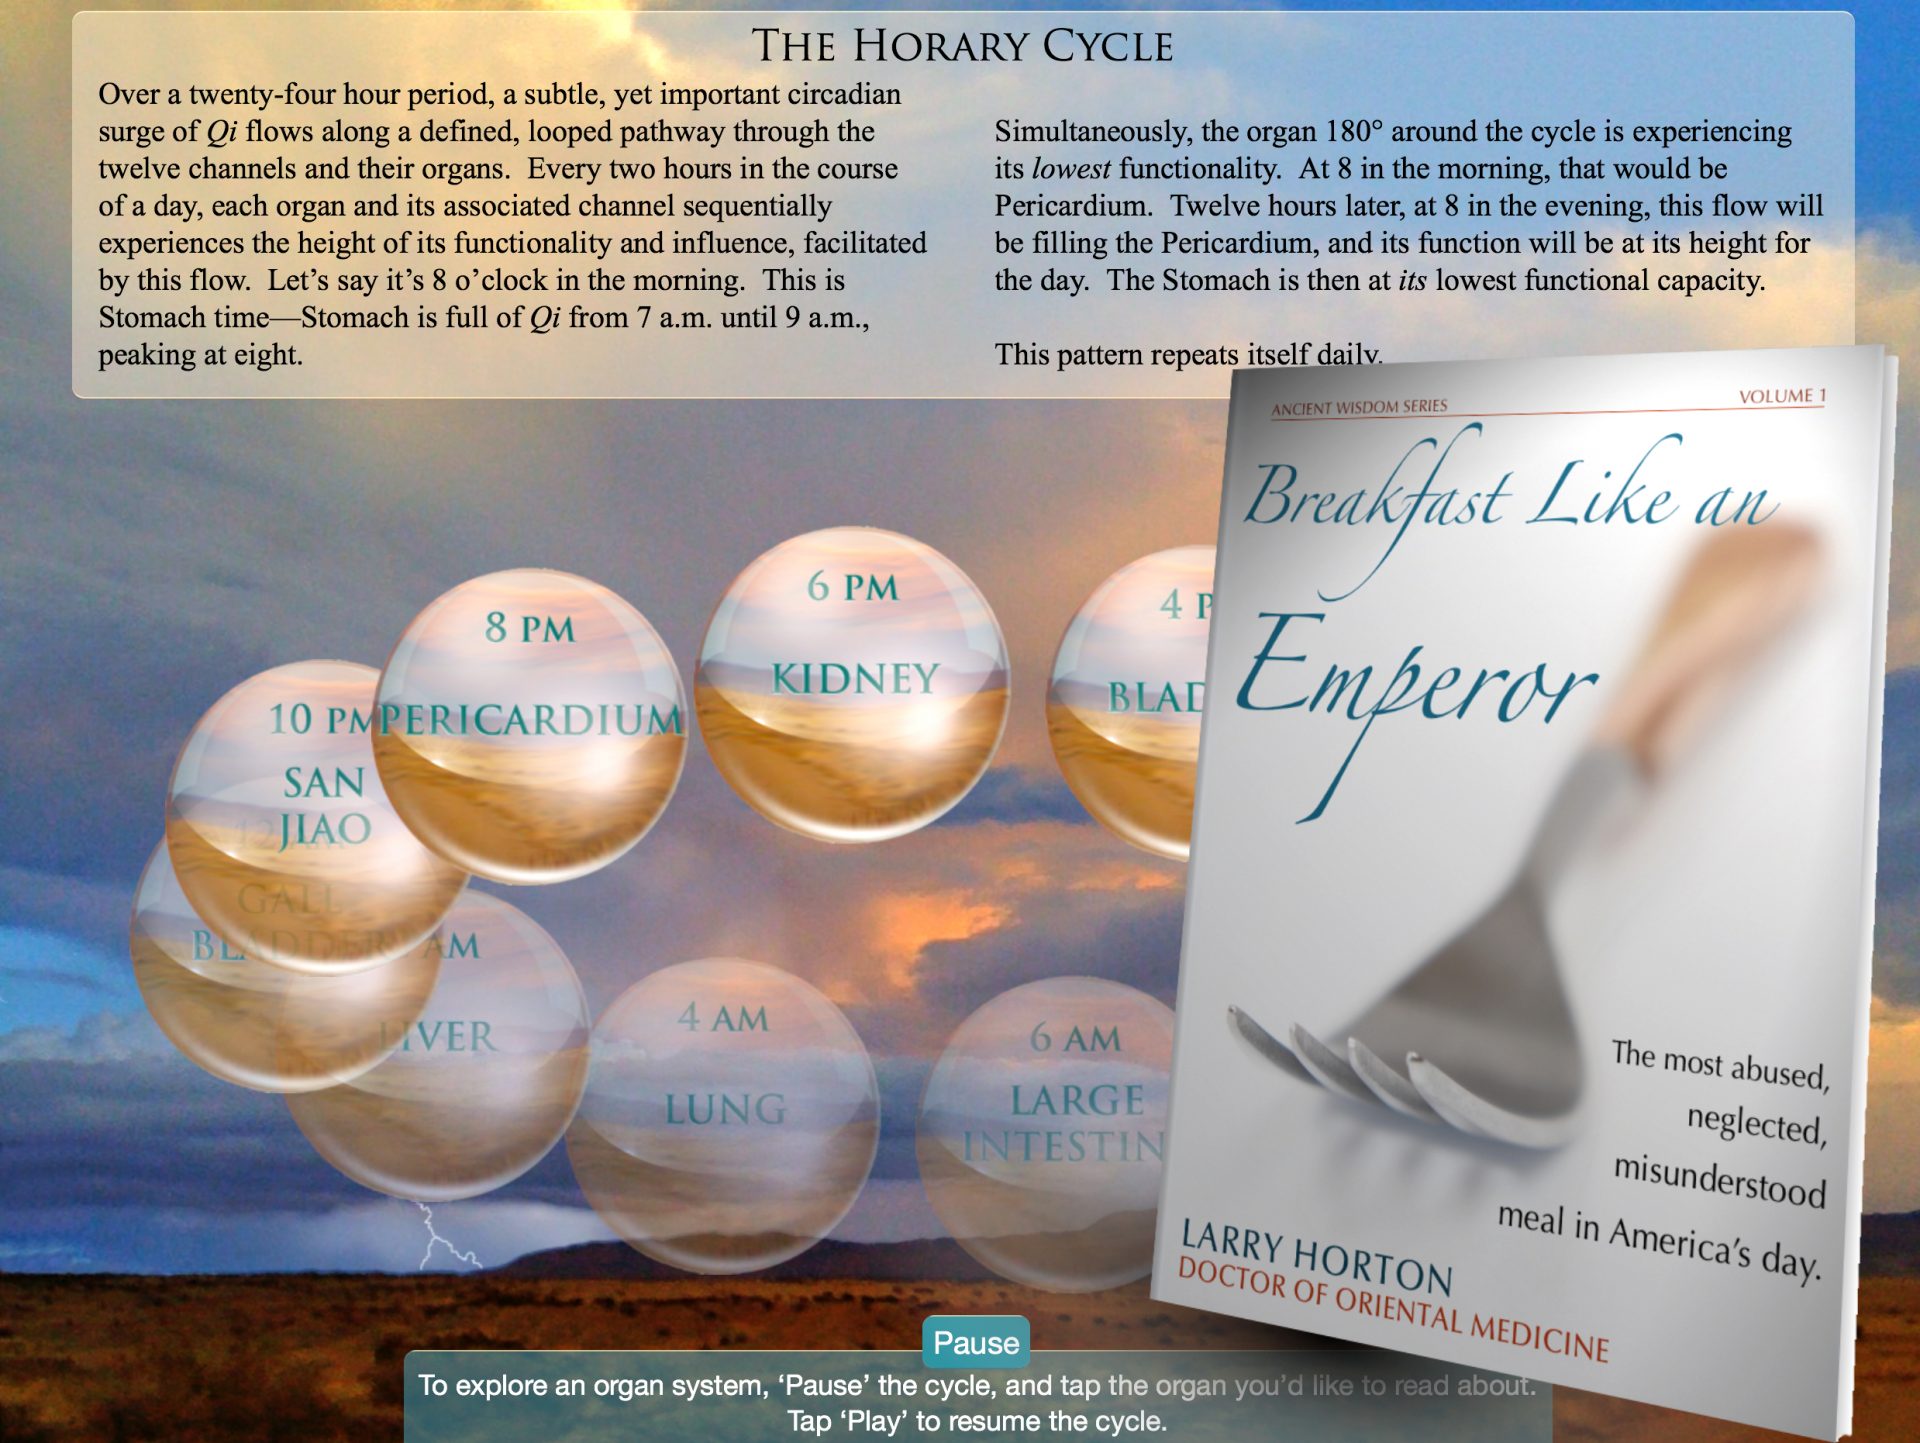 The book cover of Breakfast Like an Emperor is pictured against a background of an image from the Horary Cycle animation, which includes twelve translucent globes representing each of the twelve organs and channels in the body. The globes are circling in a precise order, at regular intervals, on a well-defined orbit.